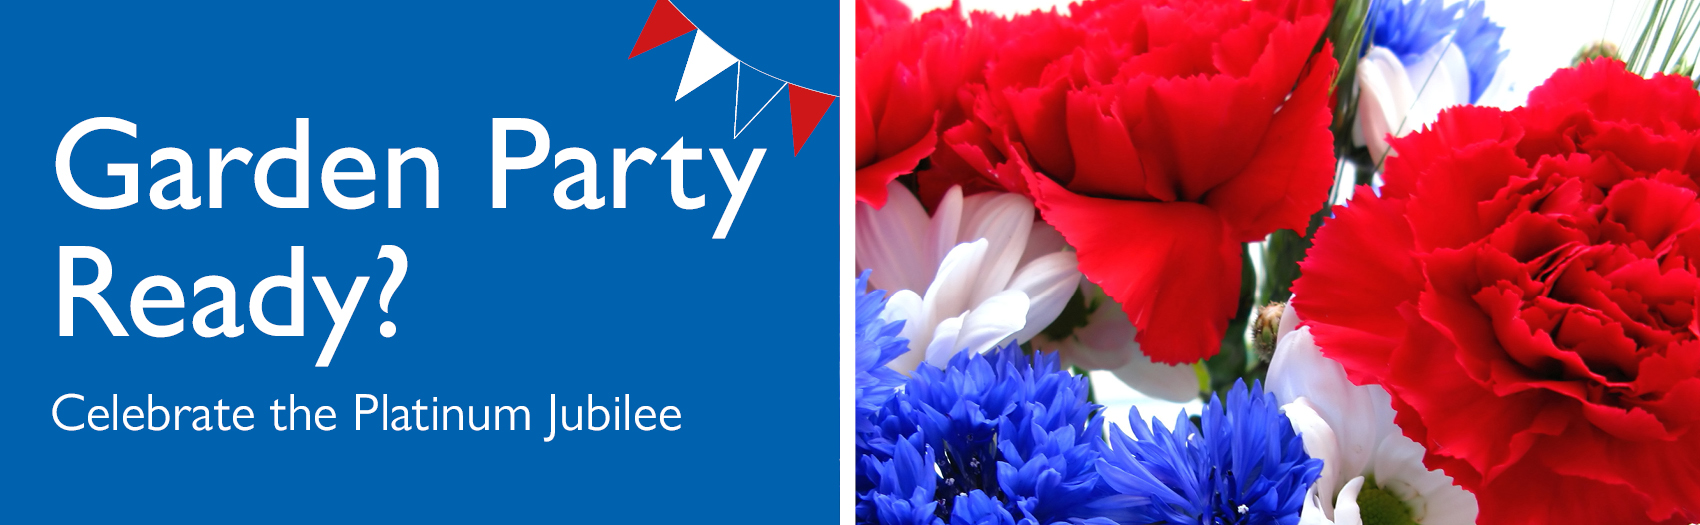 Garden Party Ready Slider - Red white and blue